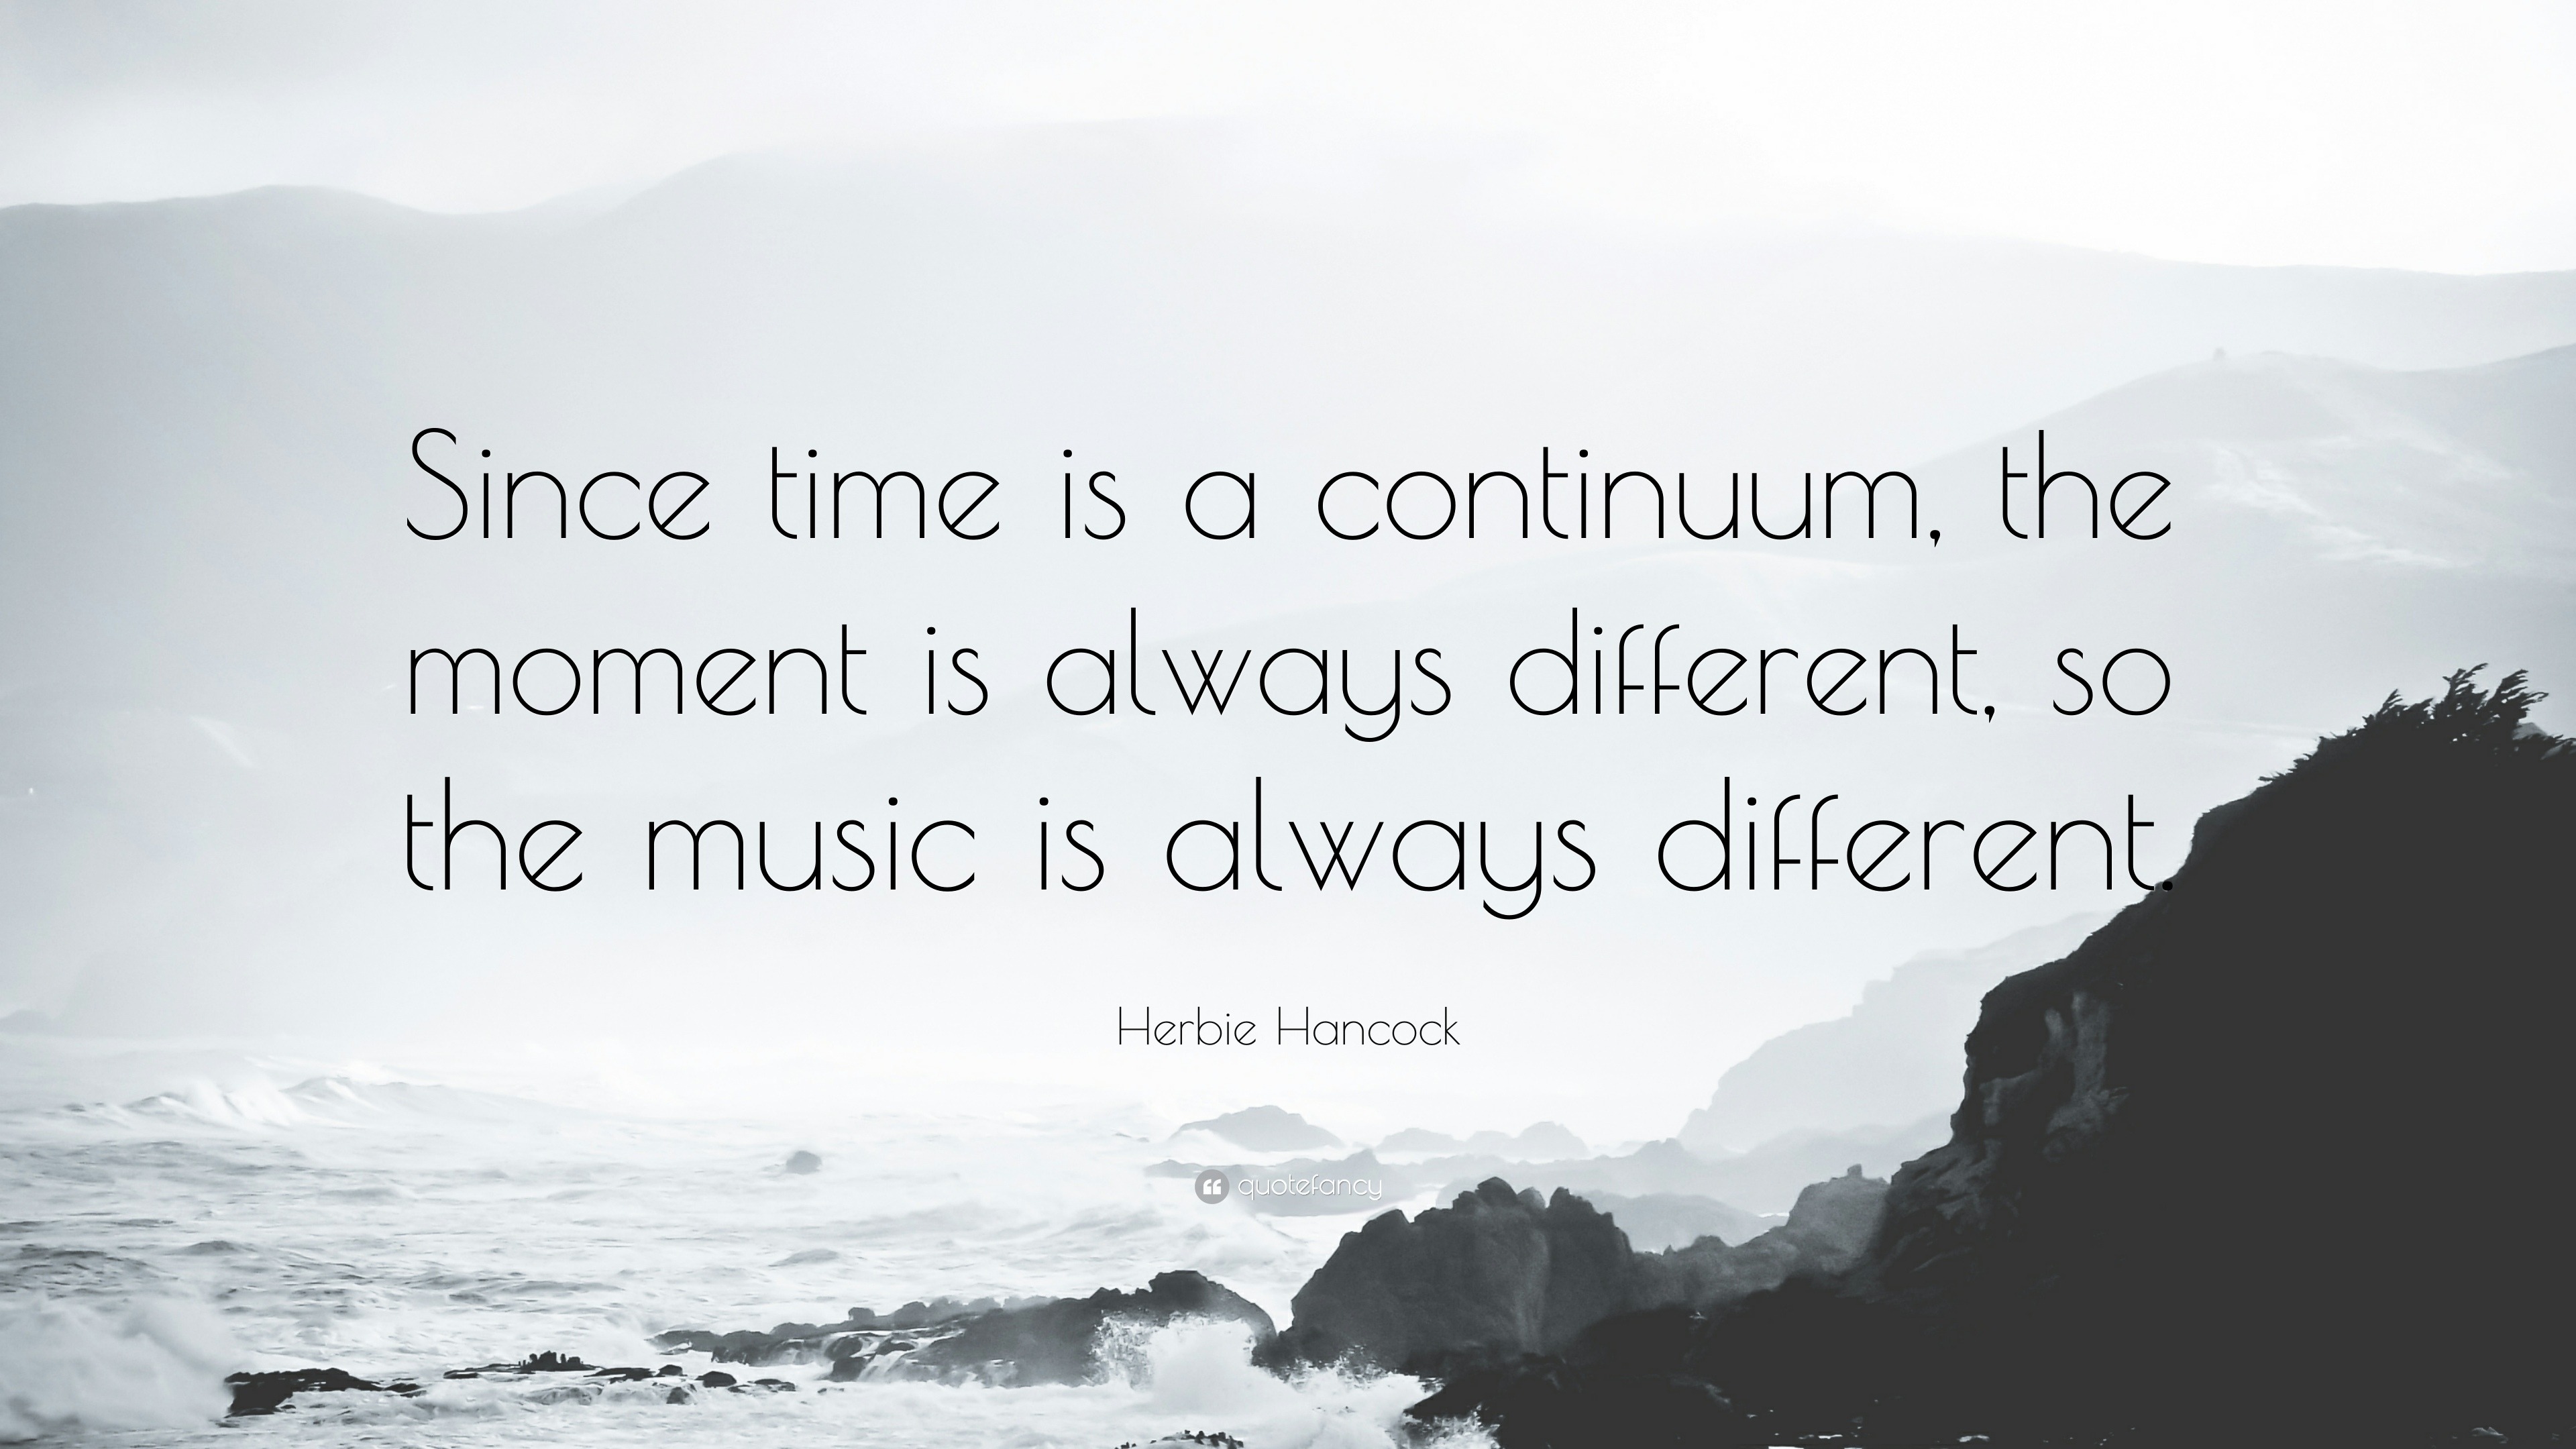 Herbie Hancock Quote: “Since time is a continuum, the moment is always ...